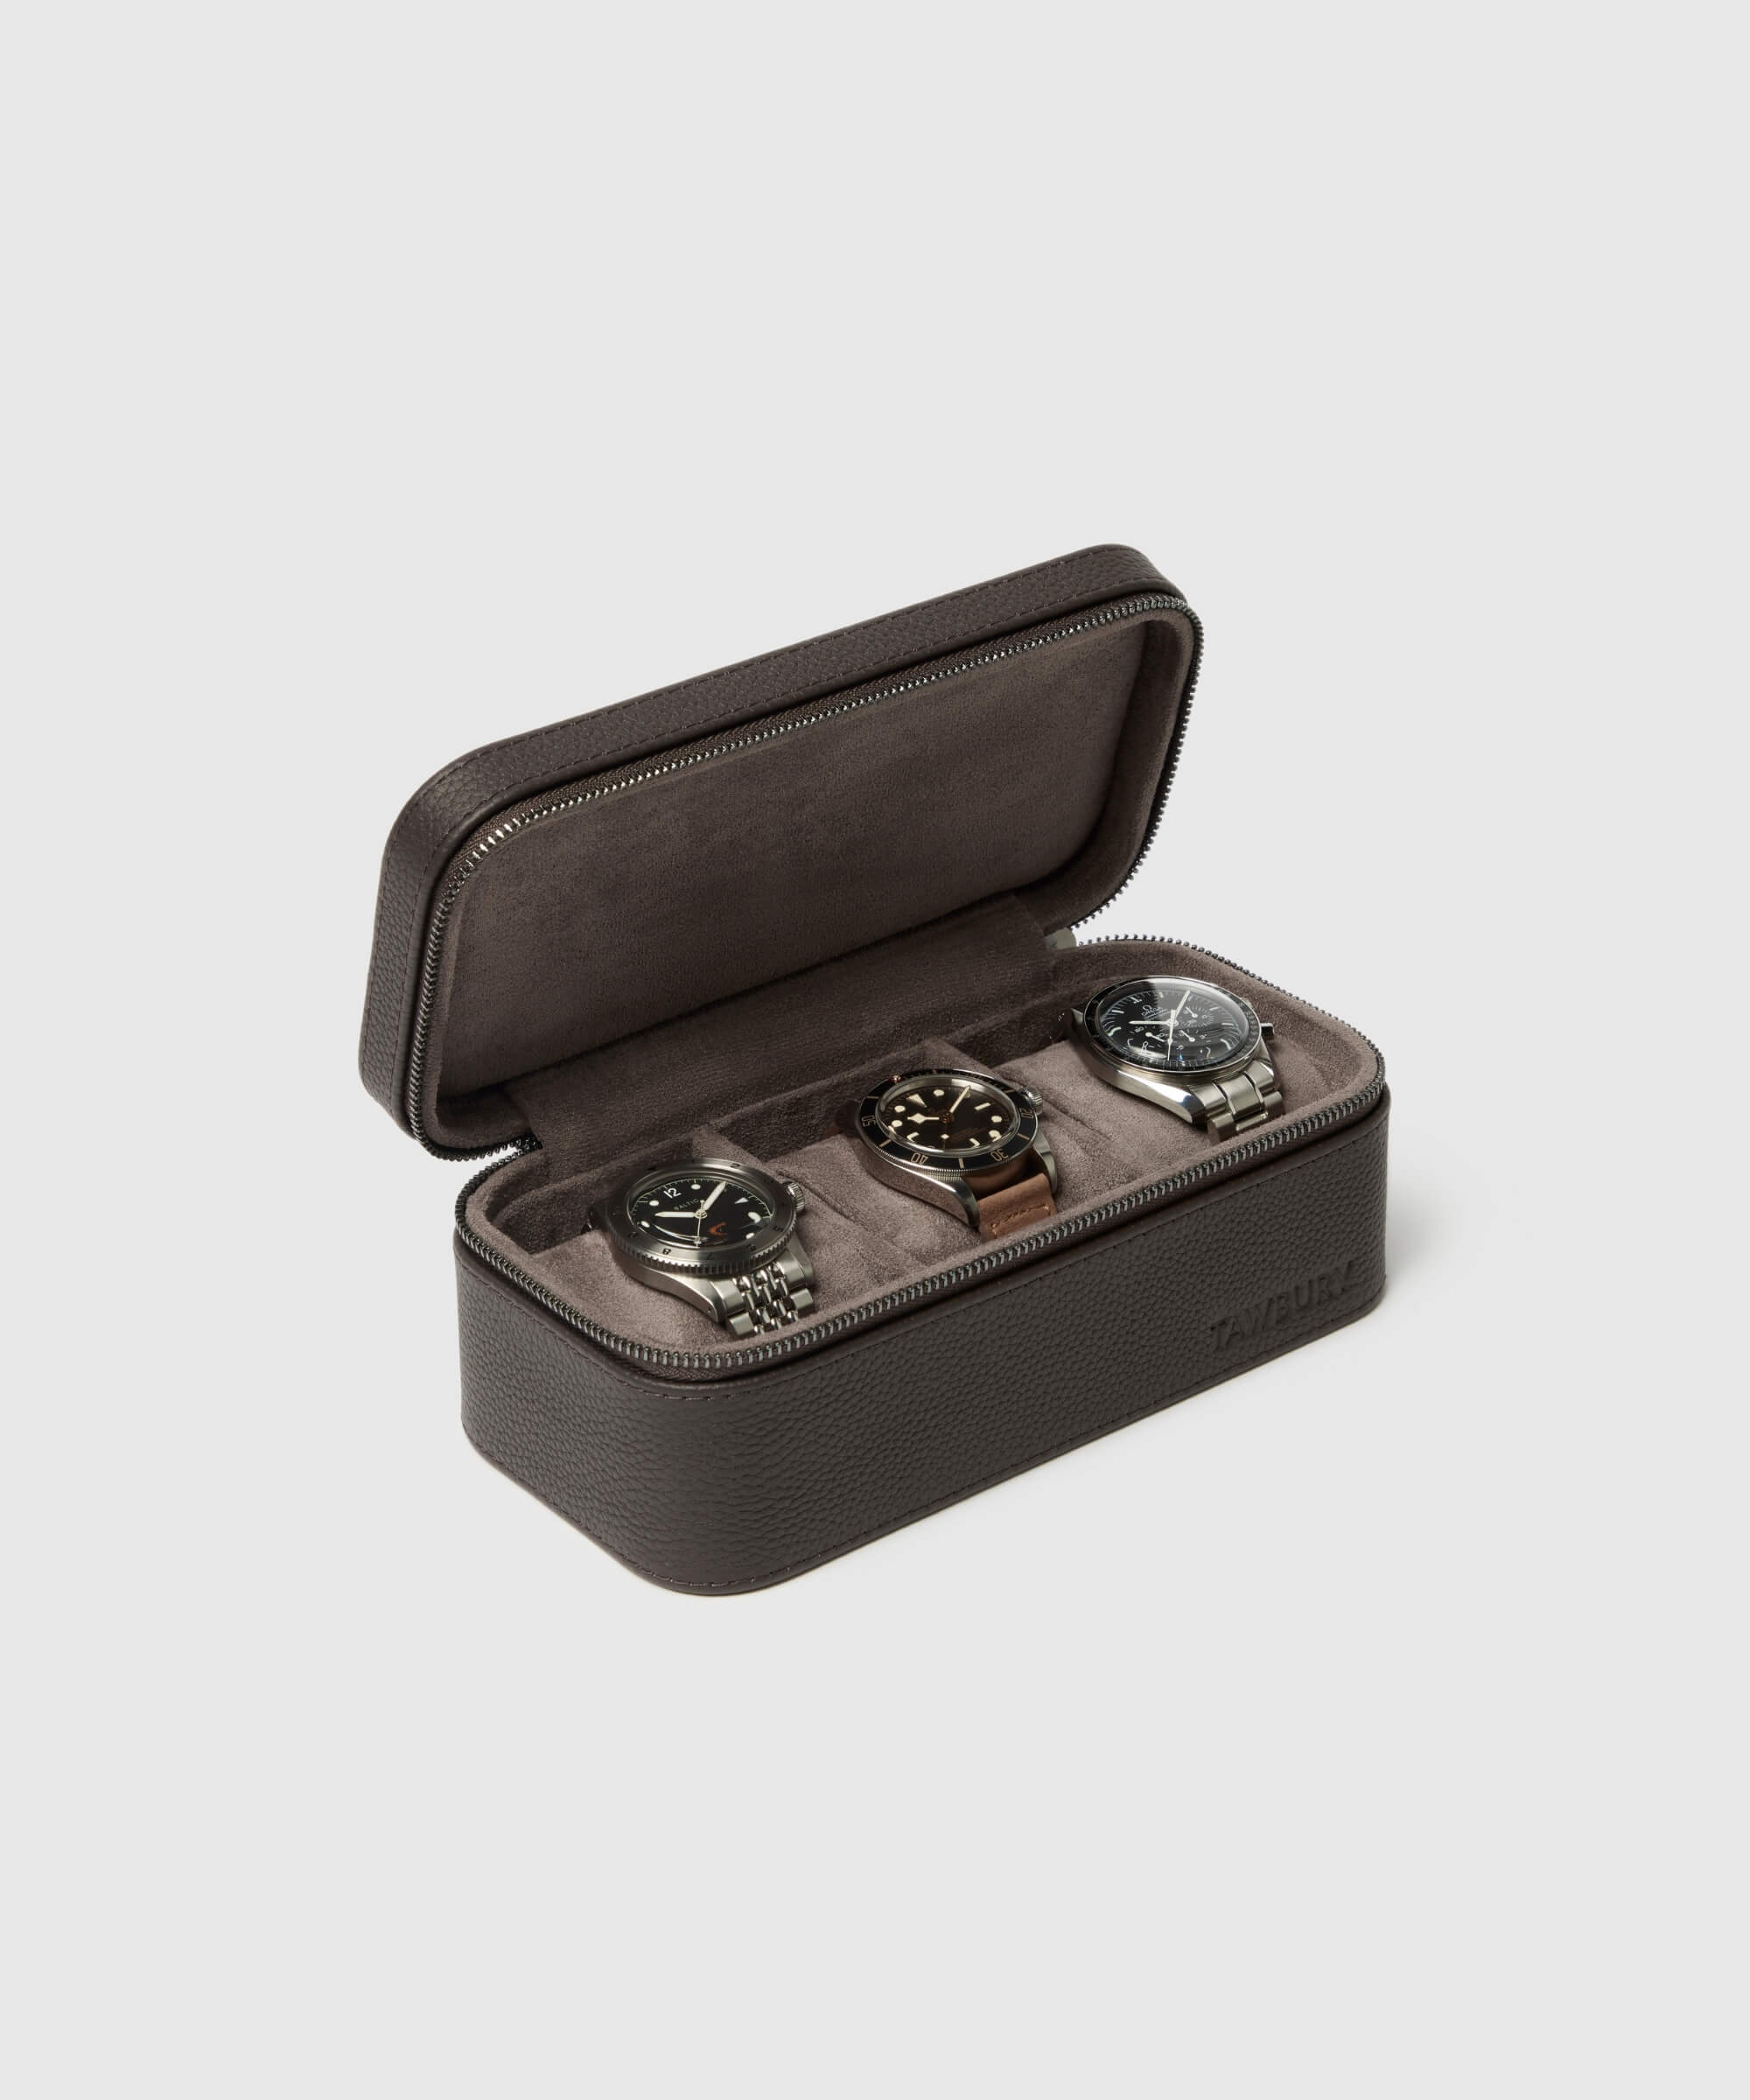 A TAWBURY Fraser 3 Watch Travel Case - Brown, a compact and portable watch case featuring a travel case design, crafted with premium leather material, and capable of holding three watches.